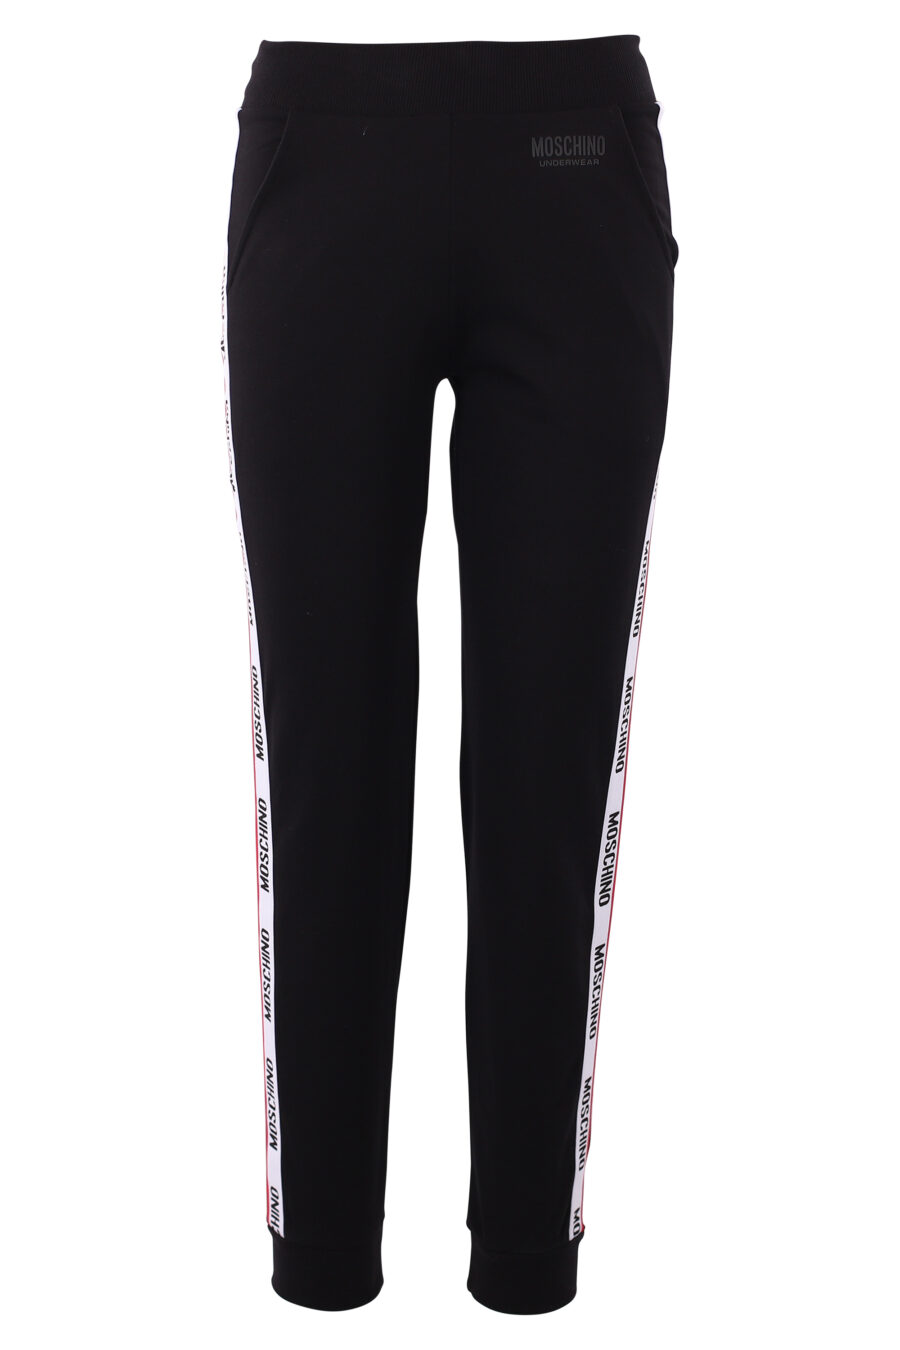 Tracksuit bottoms black with side band logo and black logo - IMG 6280